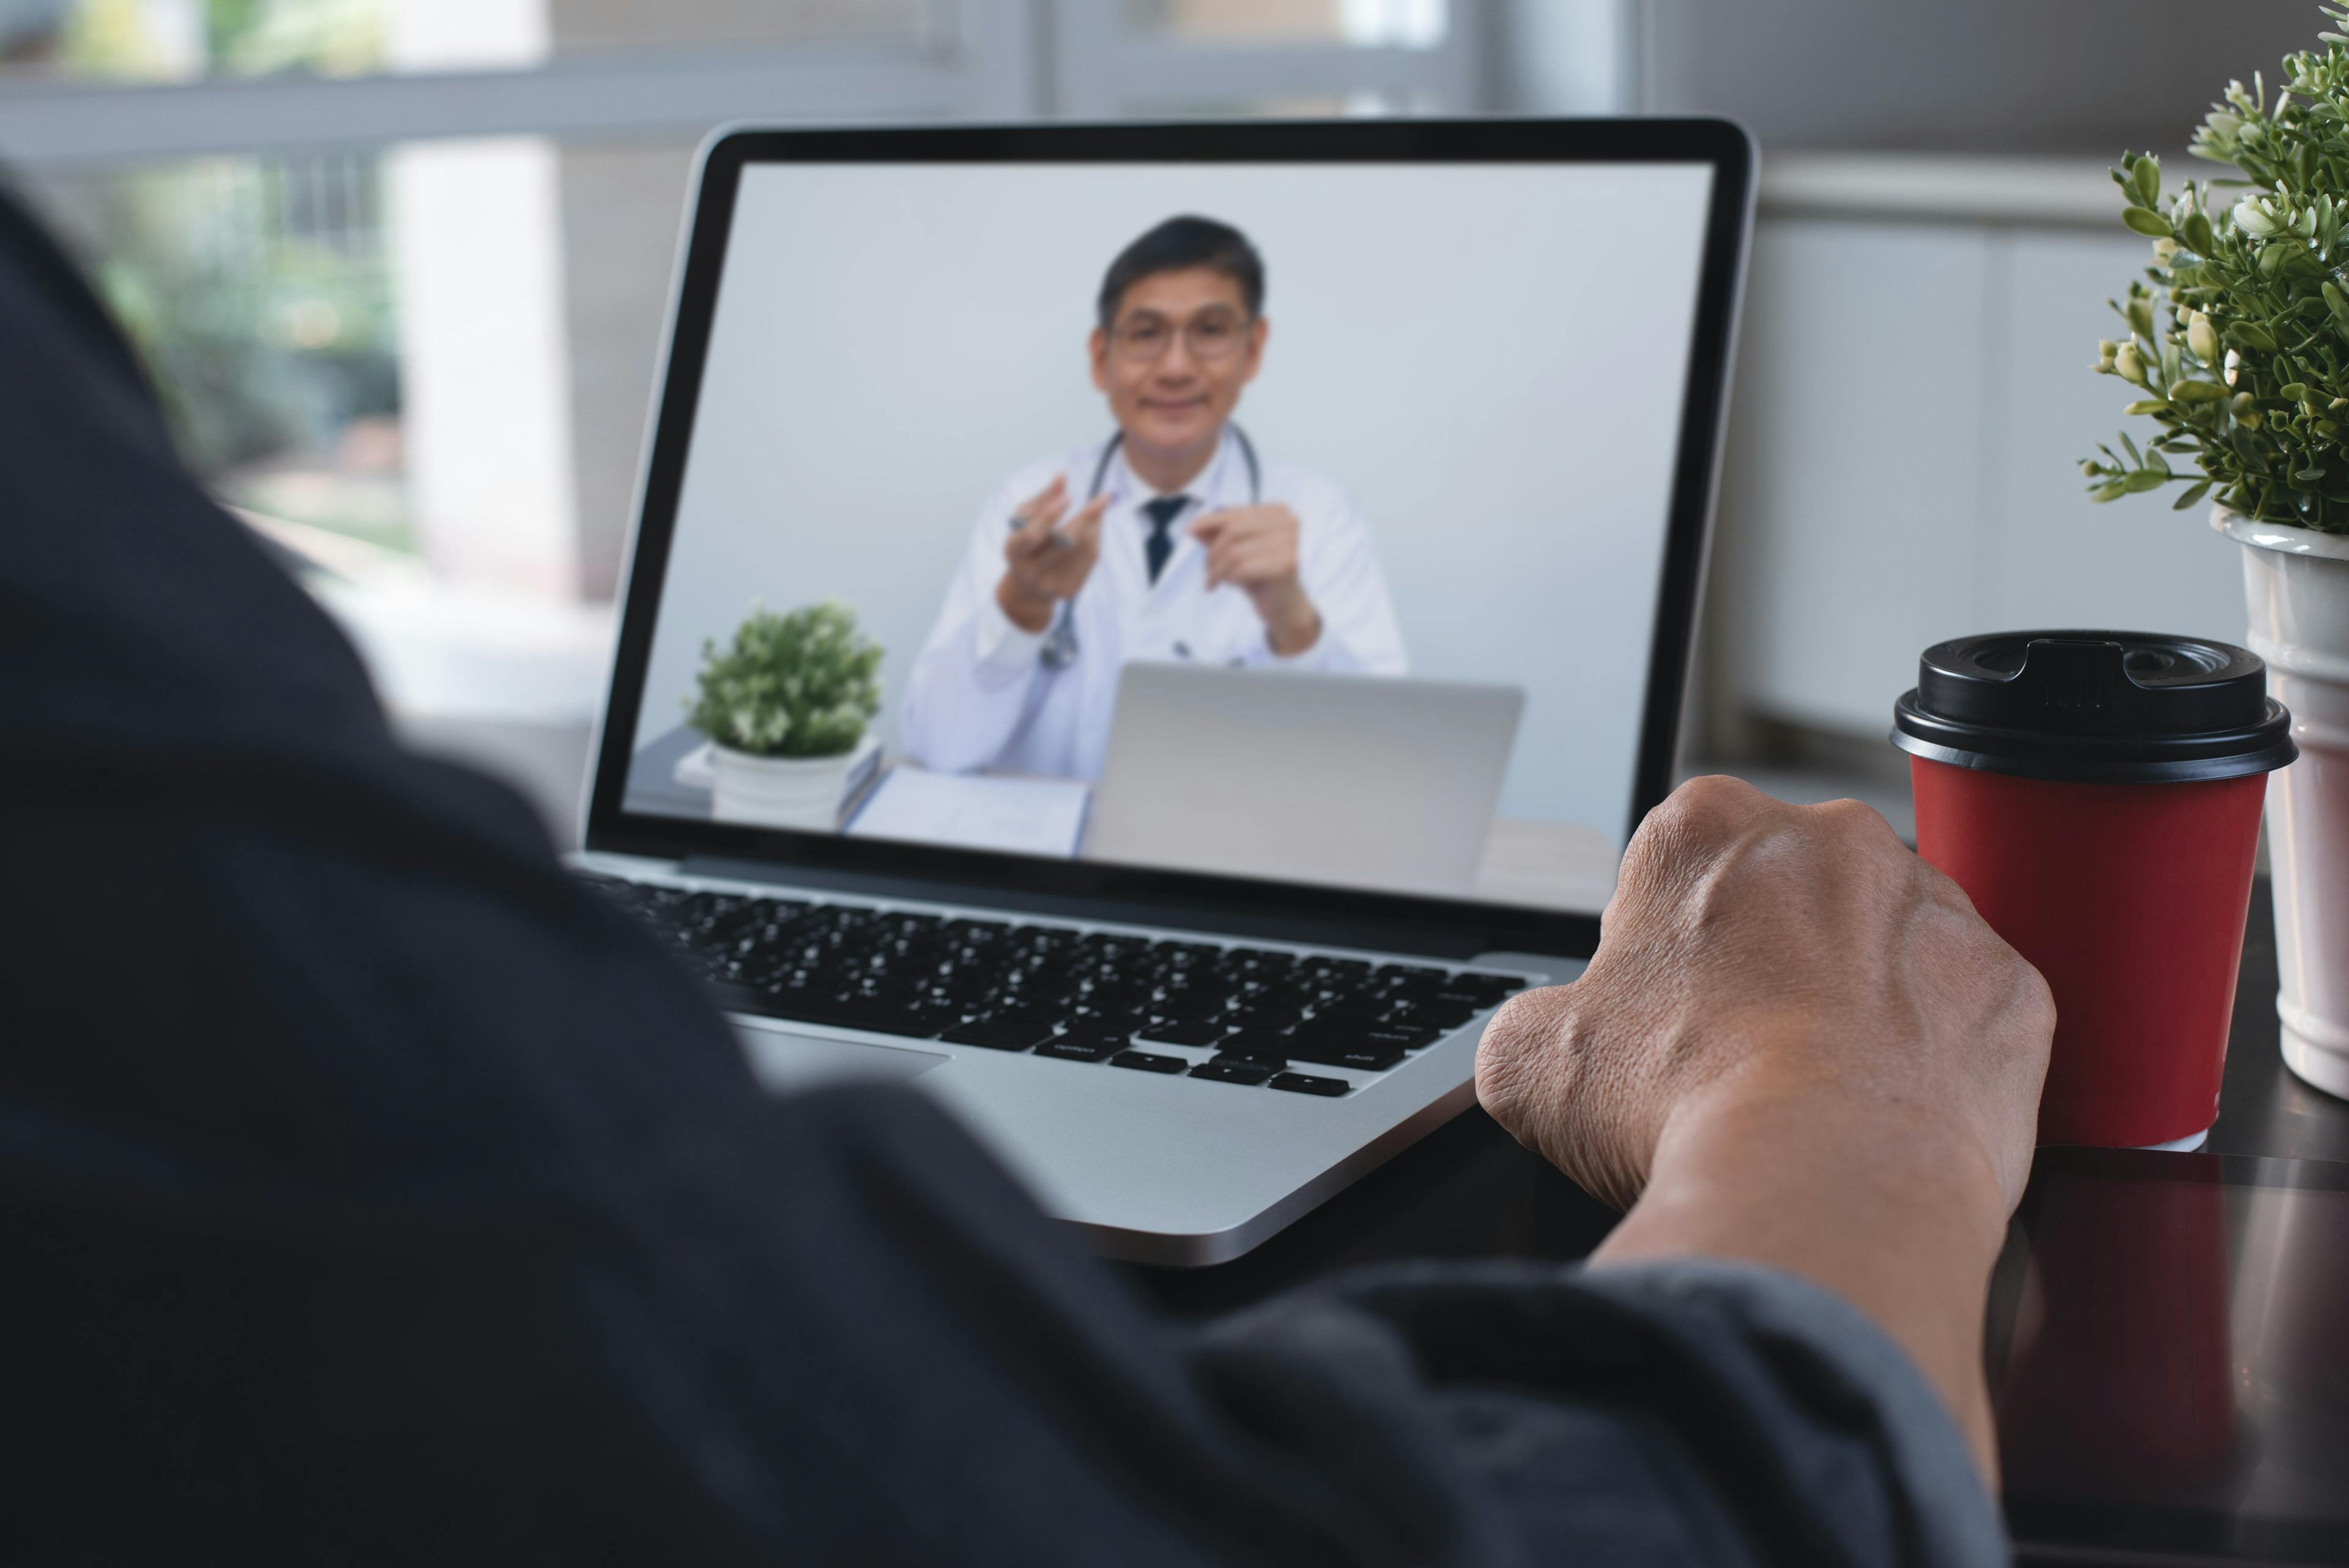 Researchers found that behavioral health patients in Louisiana had a higher no-show rate with telehealth than those with in-person appointments. (Image credit: ©Tippapatt - stock.adobe.com)